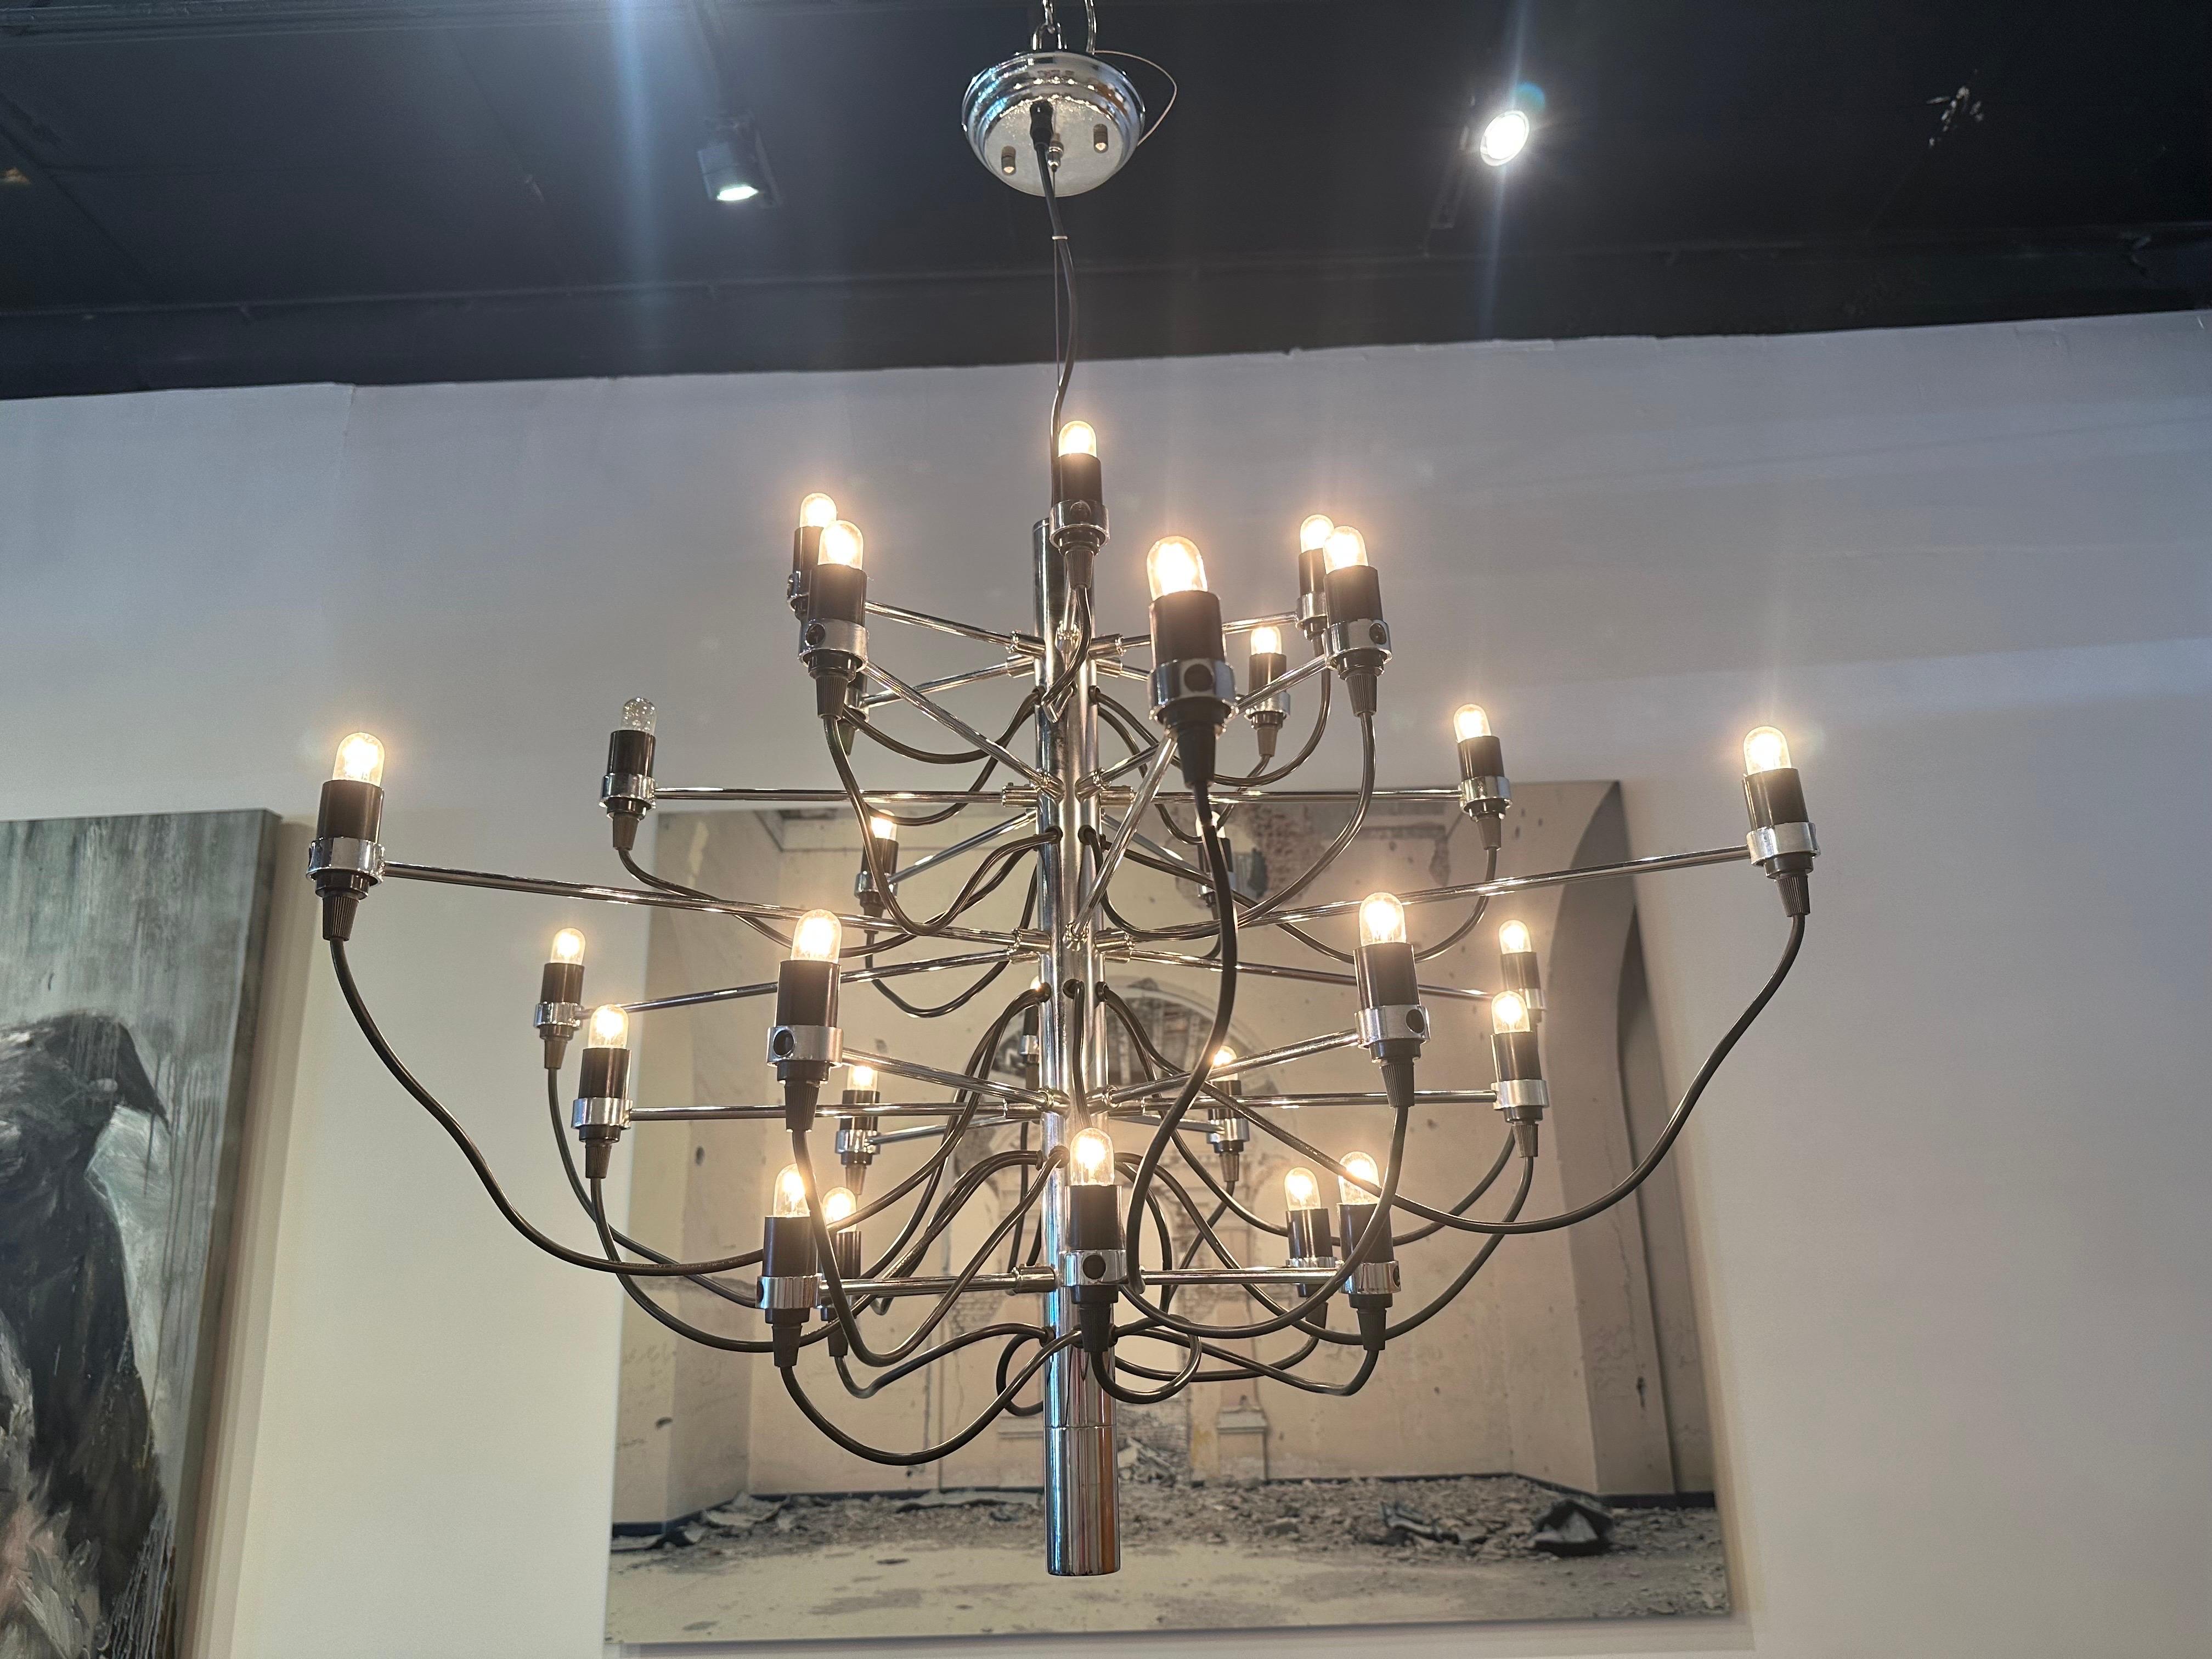 Designed originally in 1958, this iconic Gino Sarfatti chandelier has served as an ultra-modern representation of the traditional midcentury style.  Every detail of this state-of-the-art ceiling light is exceptional, from the mirror-polish of its